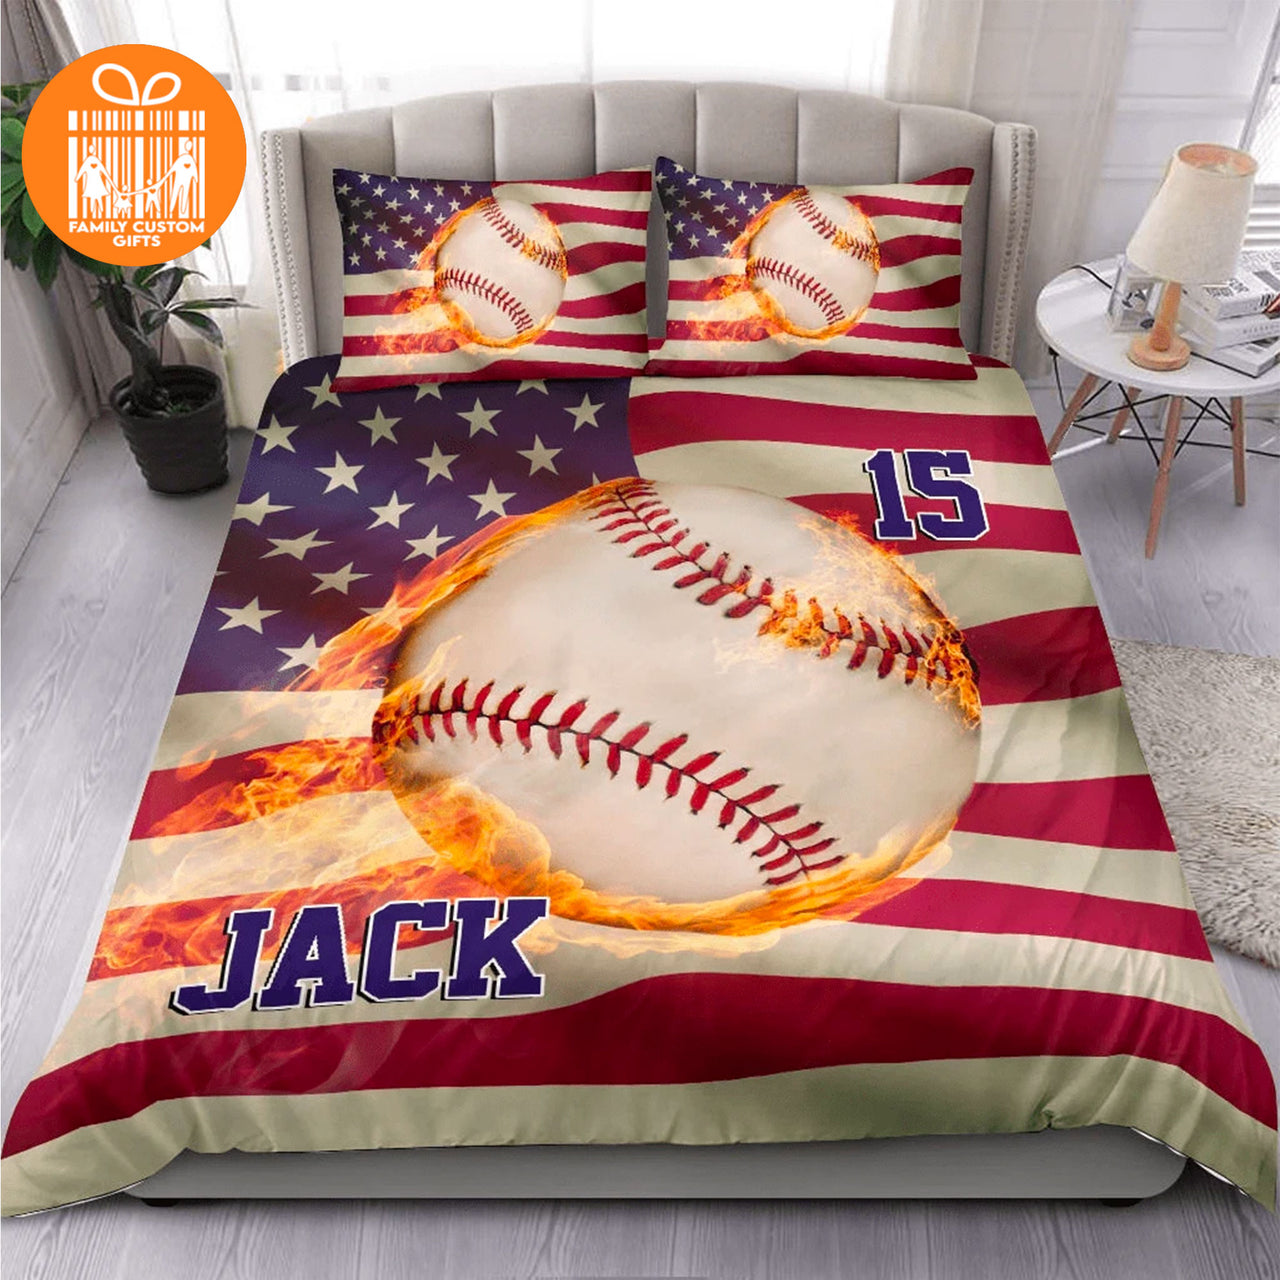 Custom Quilt Sets for Kids Teens Adult Baseball American Flag Personalized Quilt Bedding